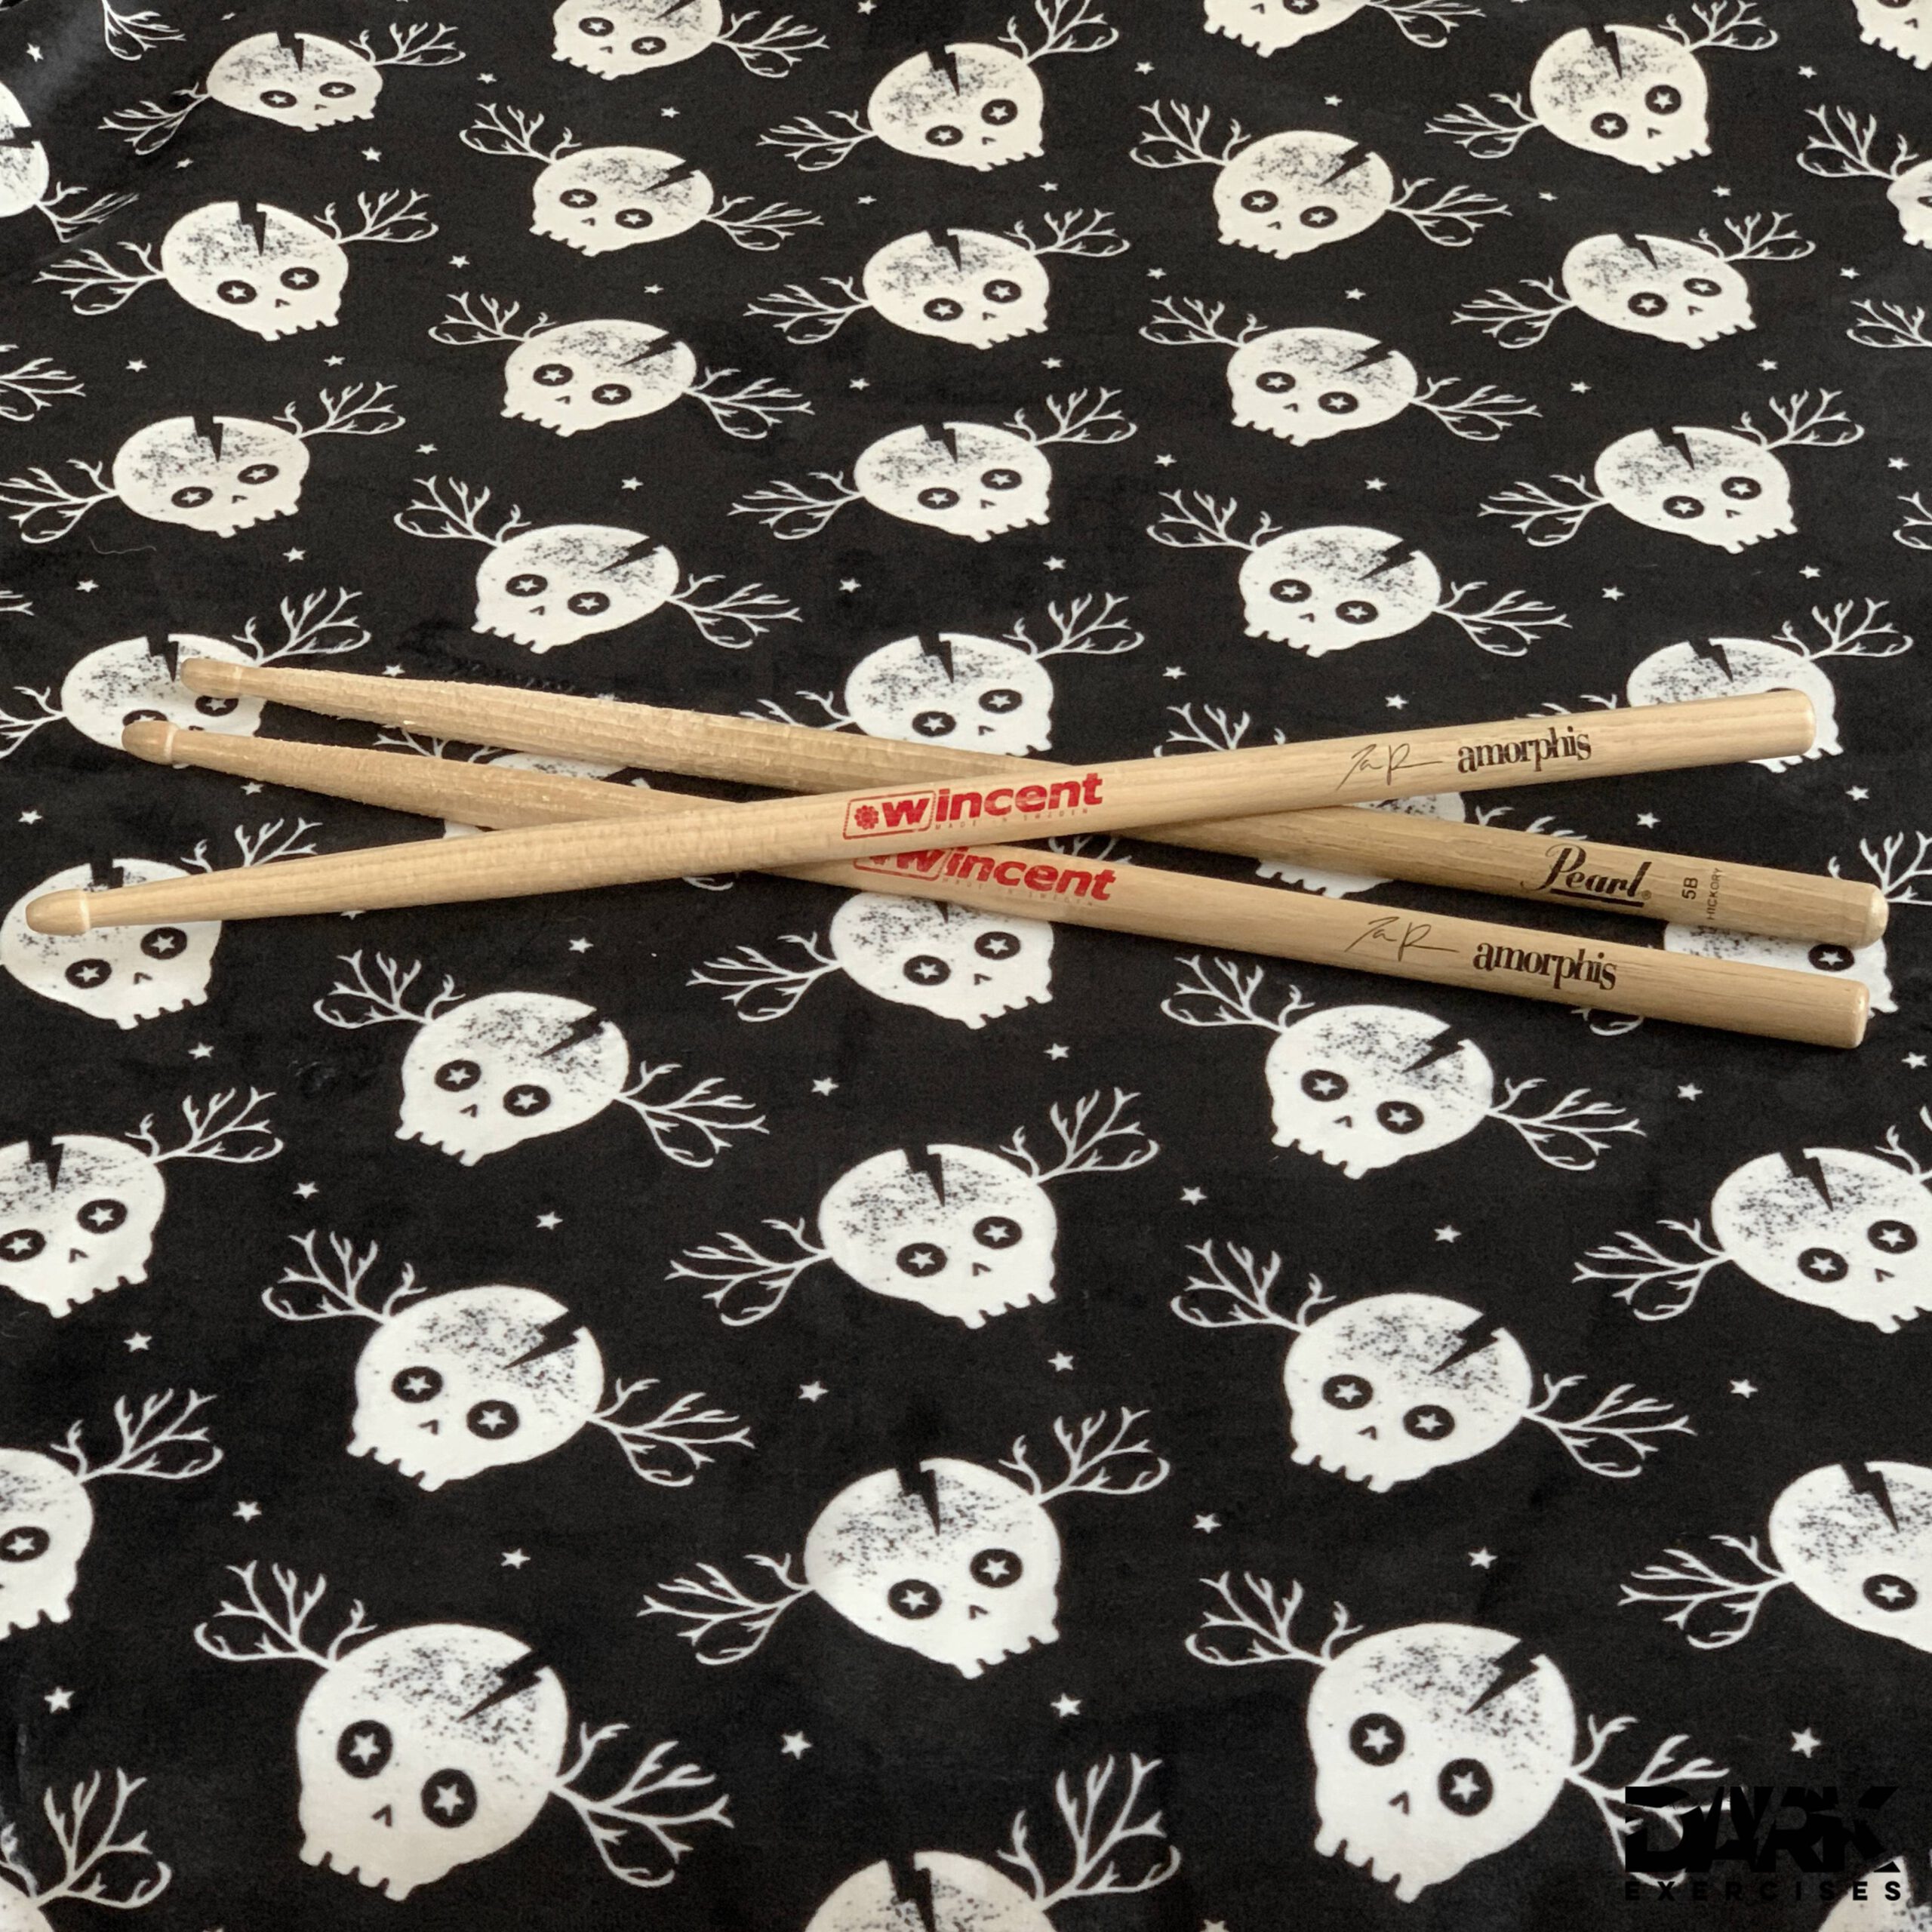 Tactfulness : Drumsticks of various Amorphis concerts